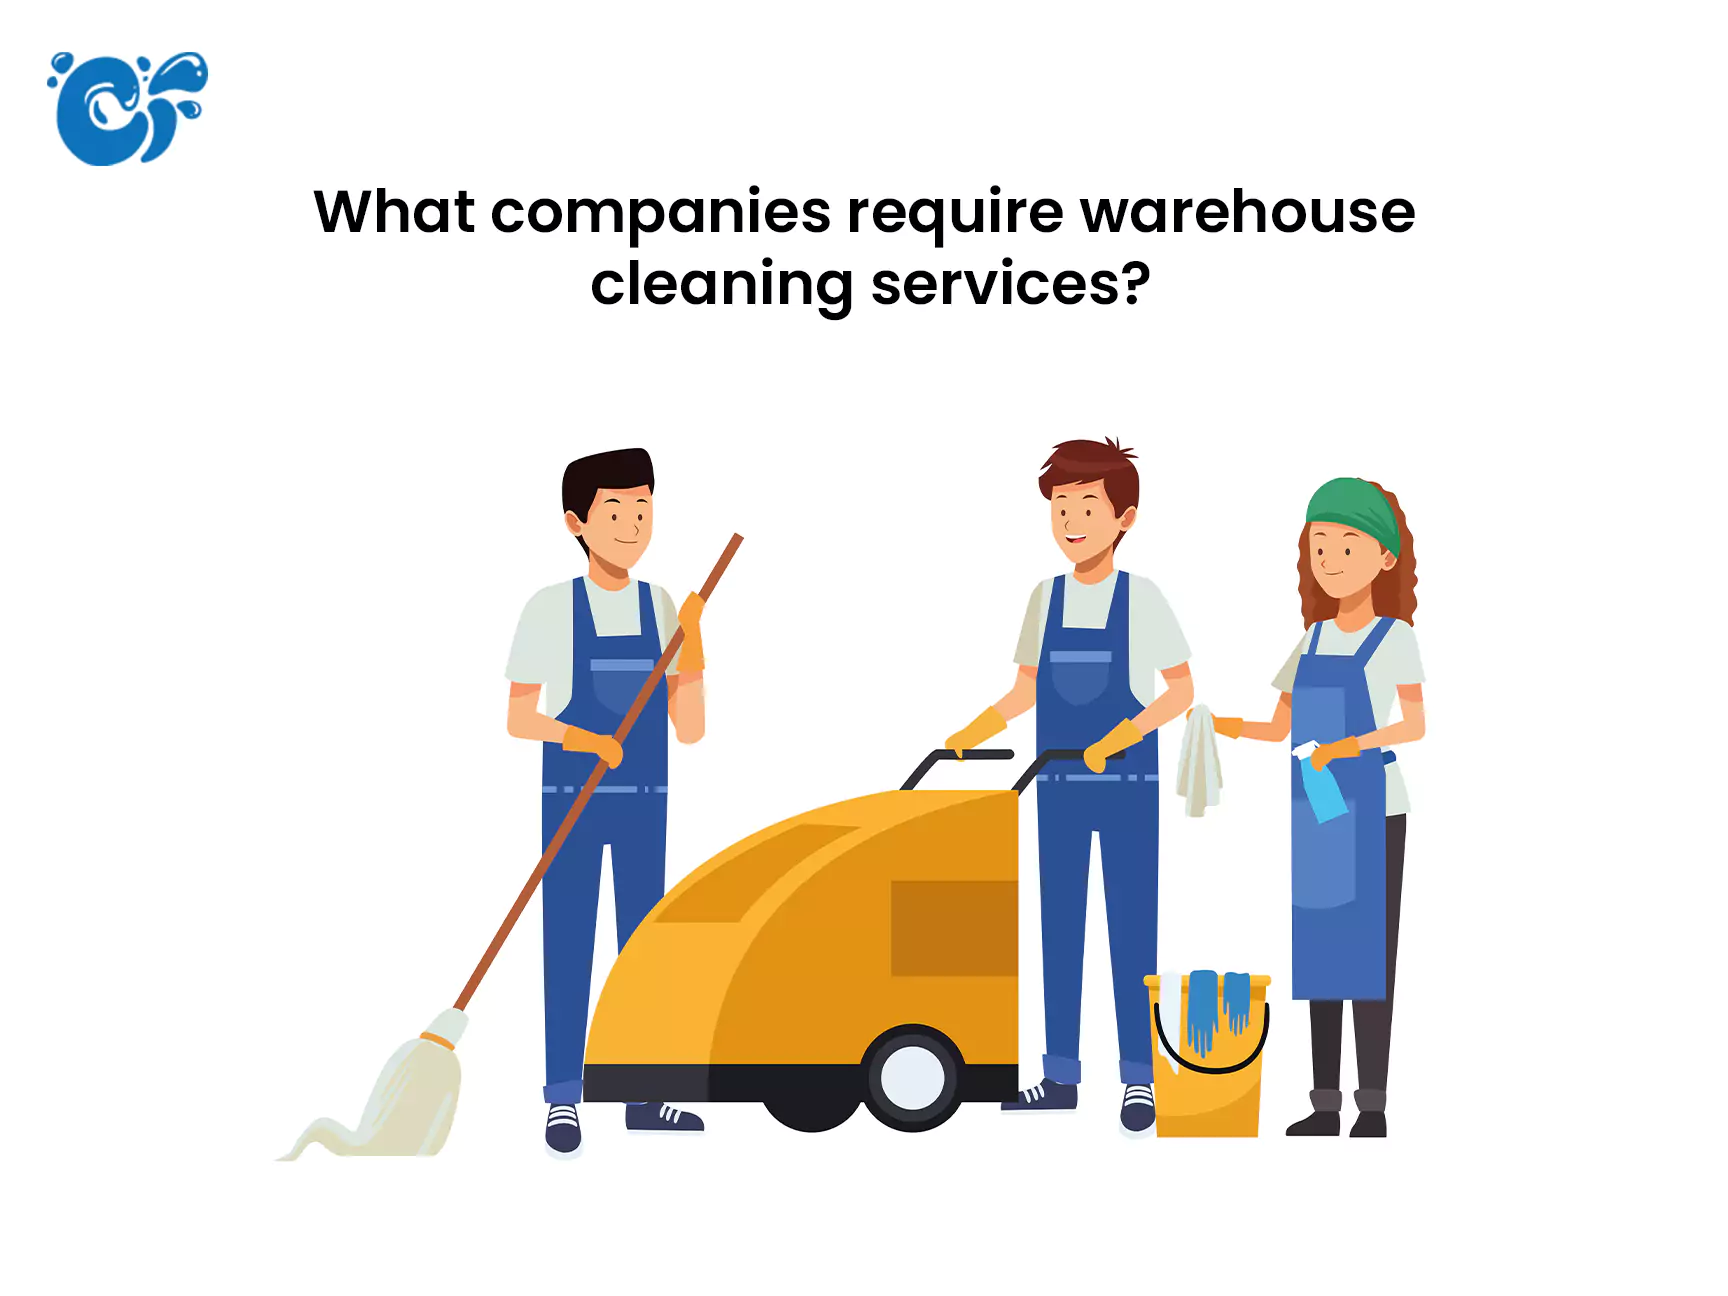 What companies require warehouse cleaning services?